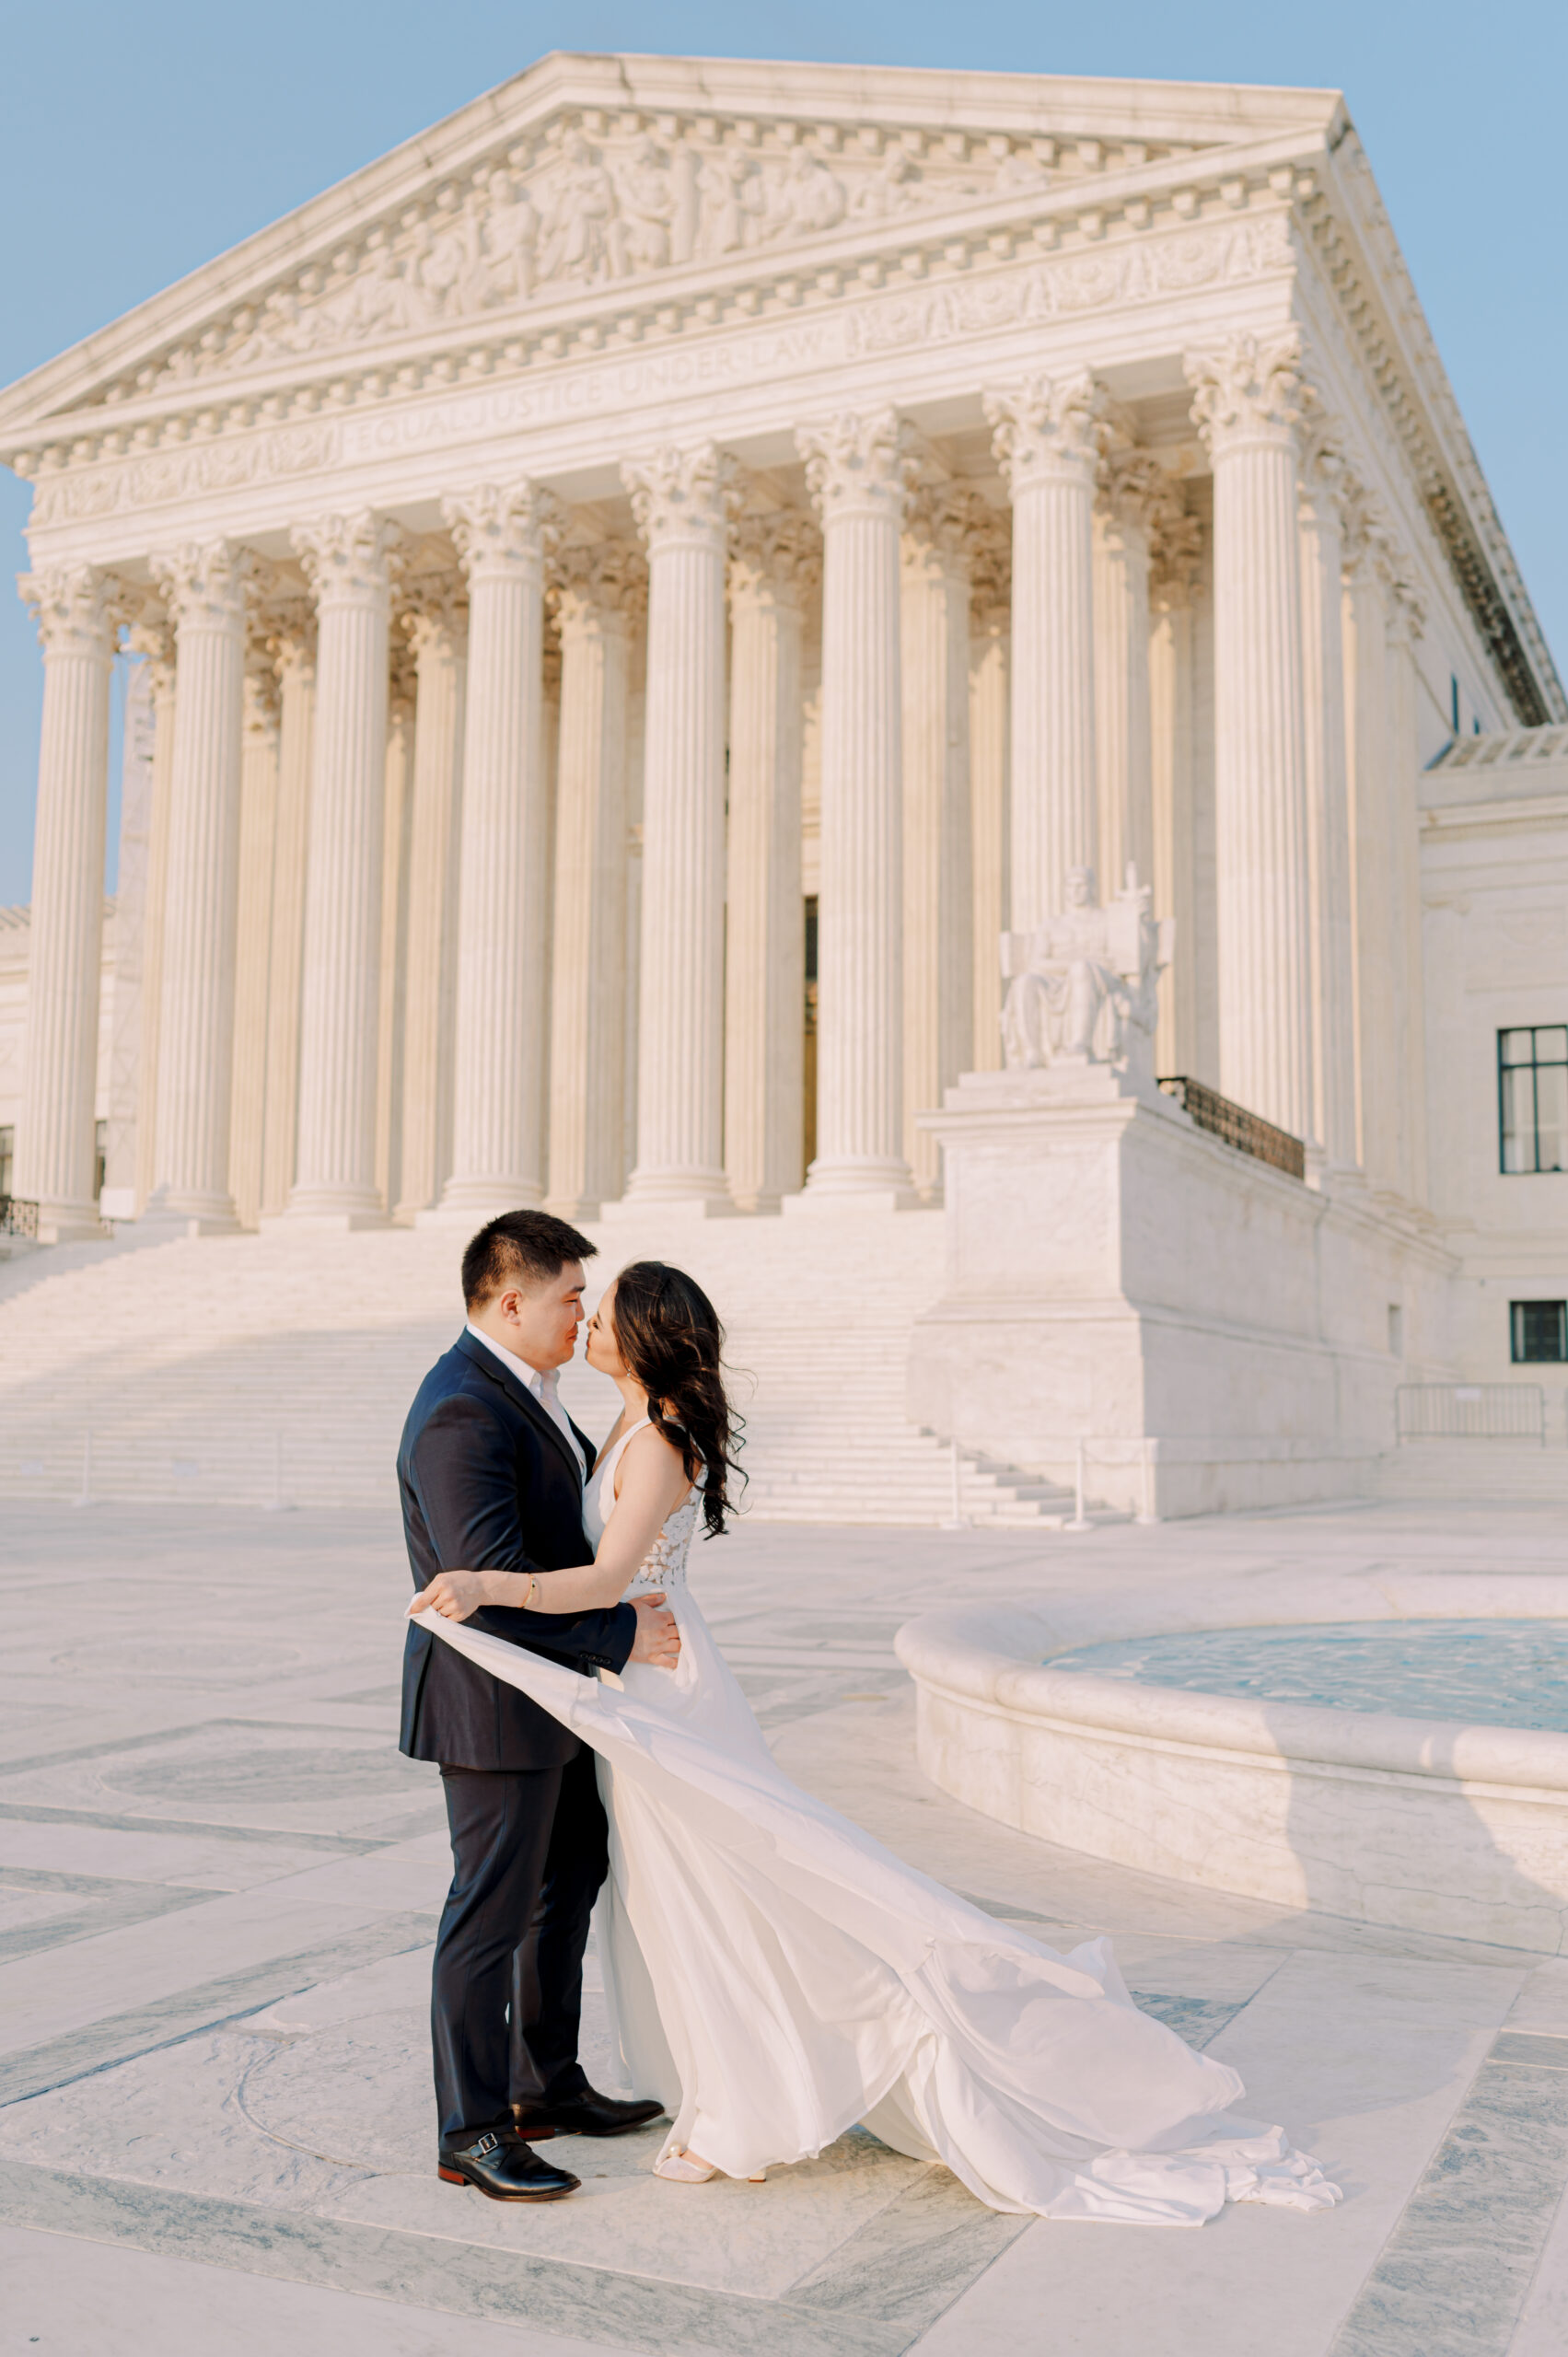 Wedding couple in front of the supreme court